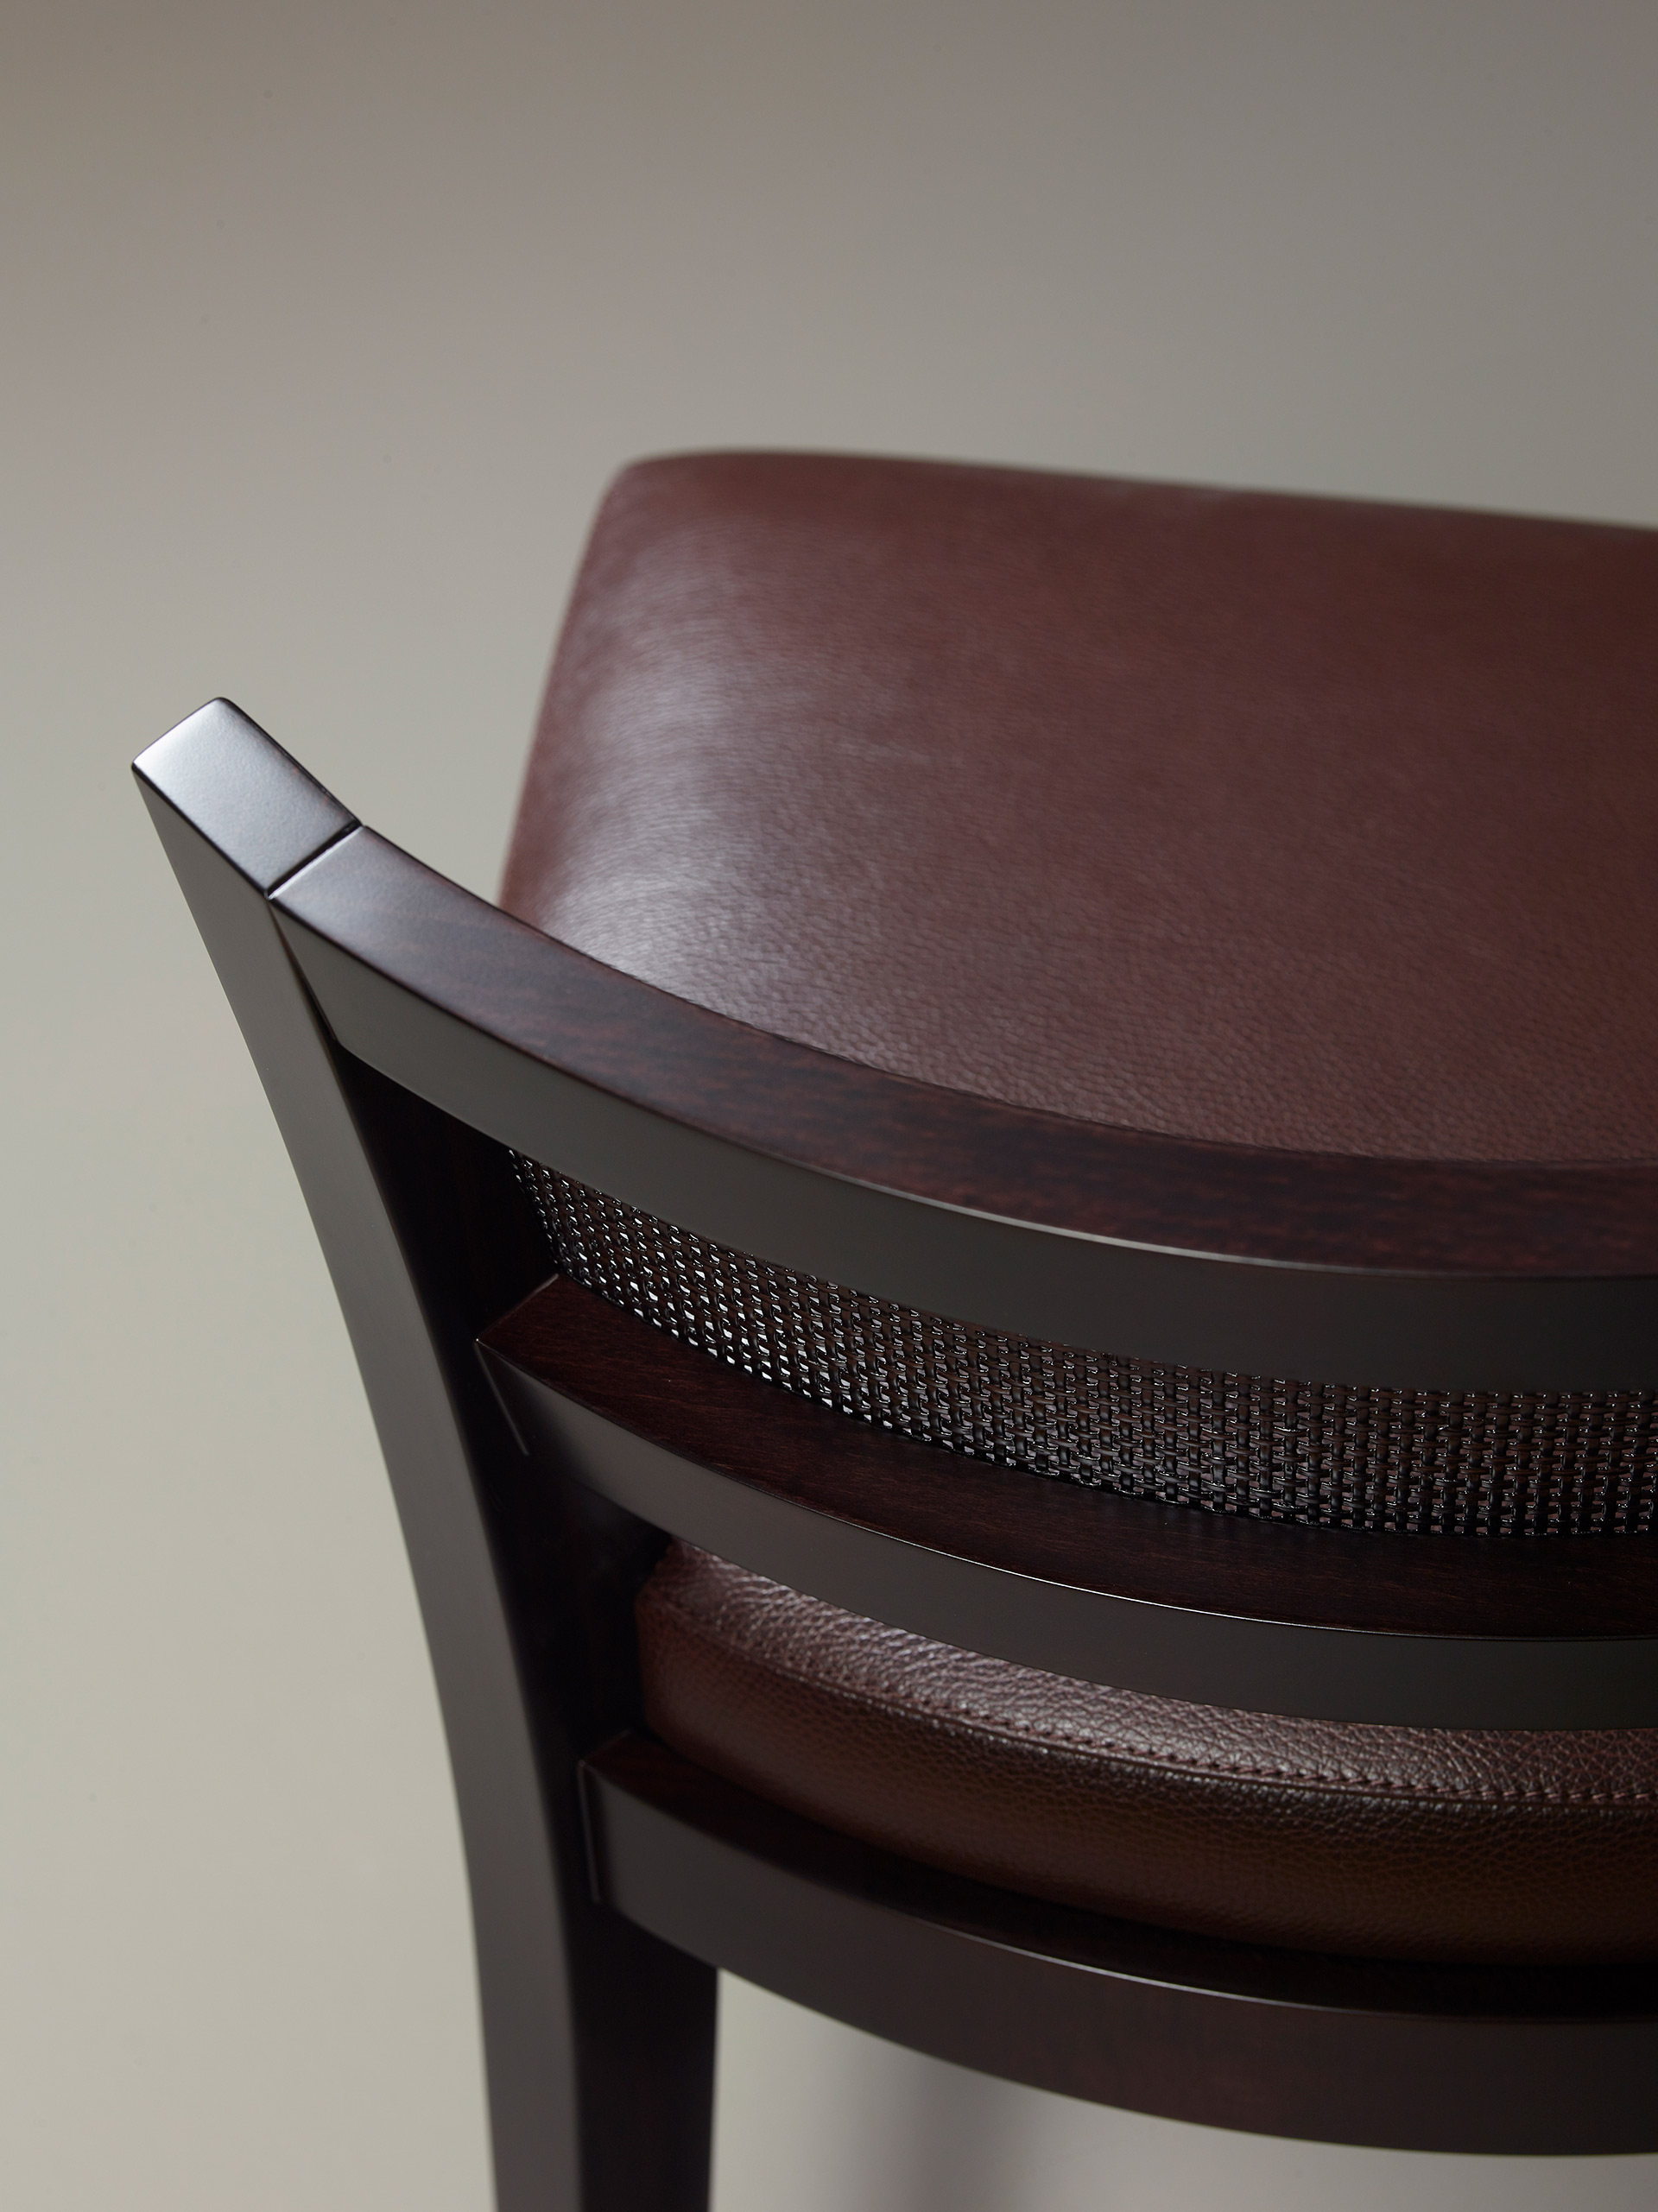 Detail of Caffè, a wooden stool with straw back and fabric or leather seat, from Promemoria's catalogue | Promemoria